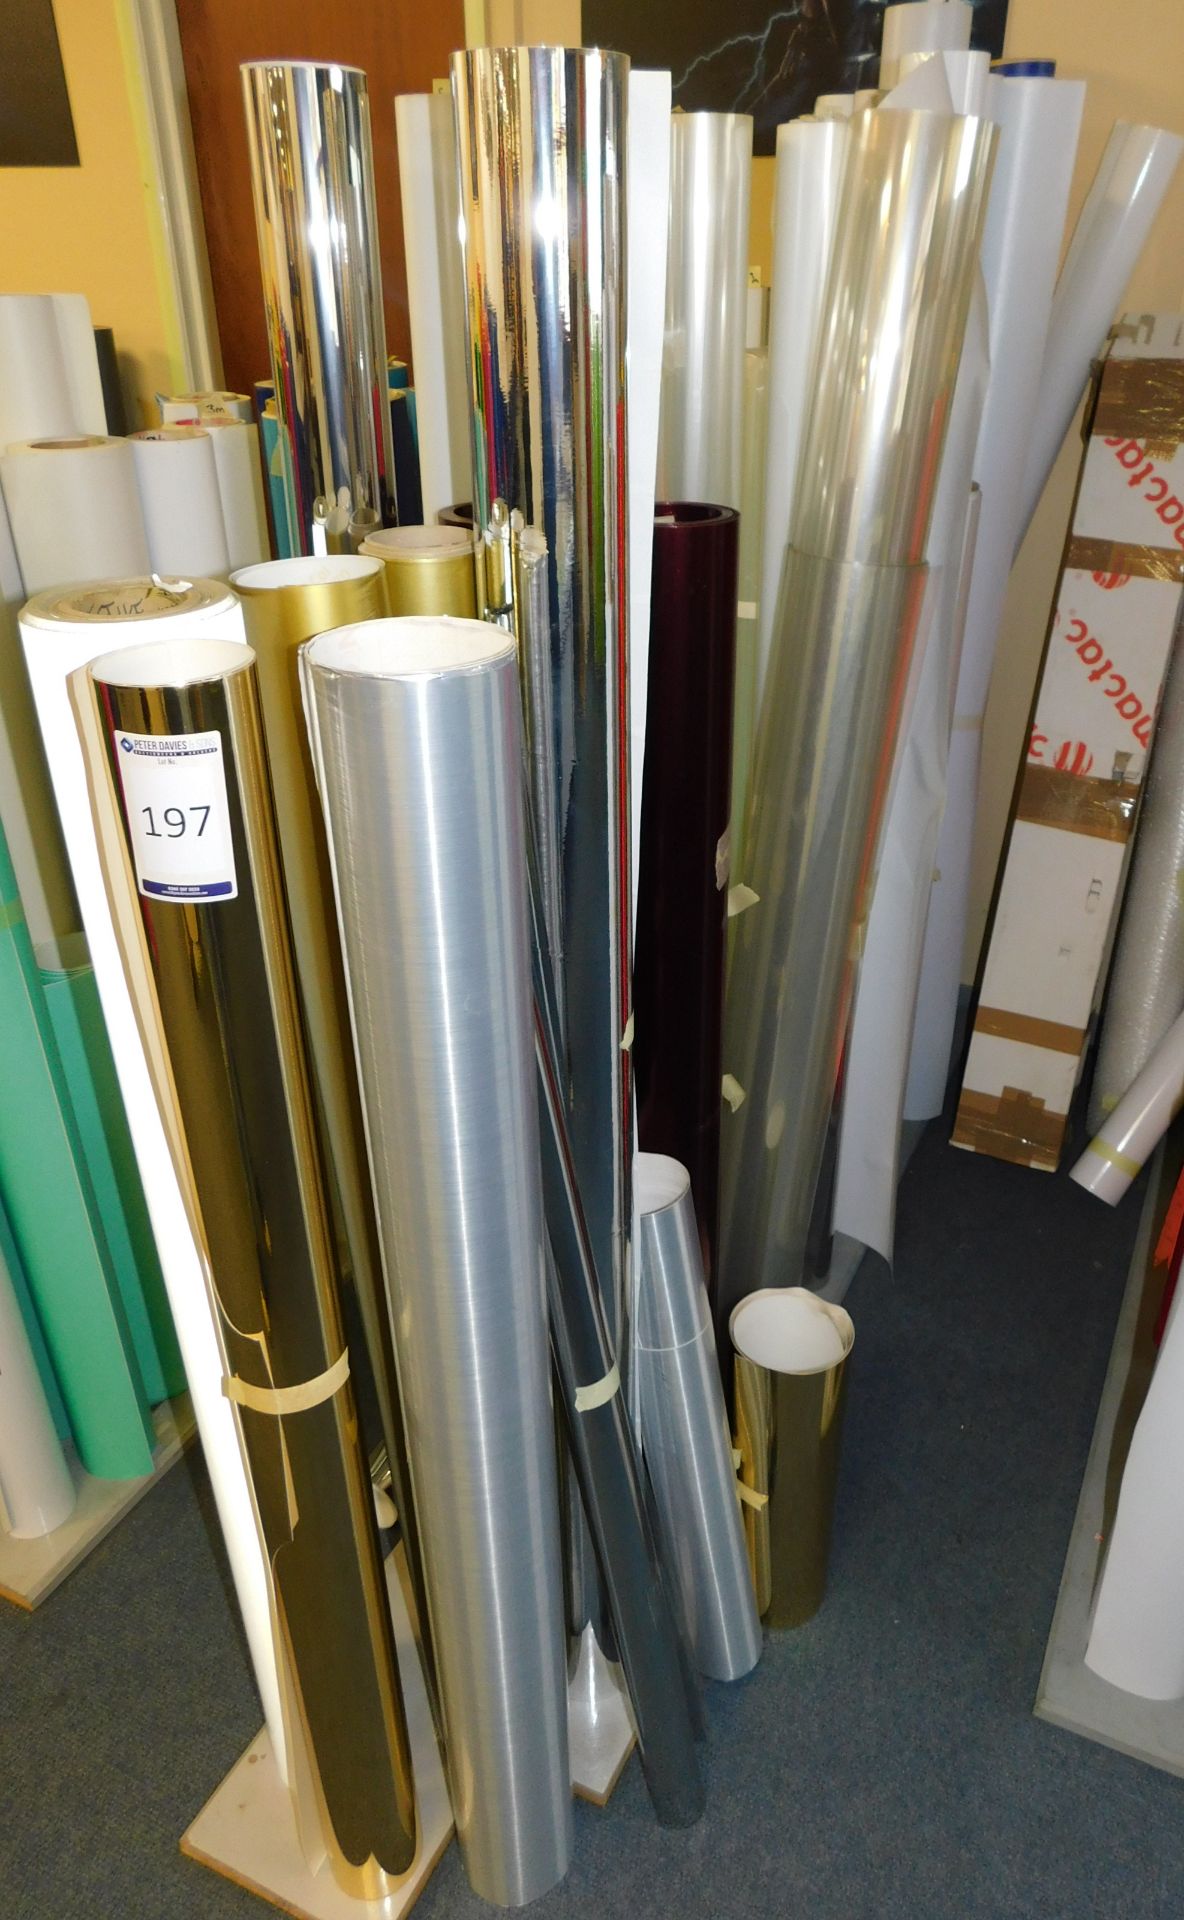 Contents of Stand to Include Quantity of Mainly Metallic Vinyl (Approx. 31 Part Rolls)